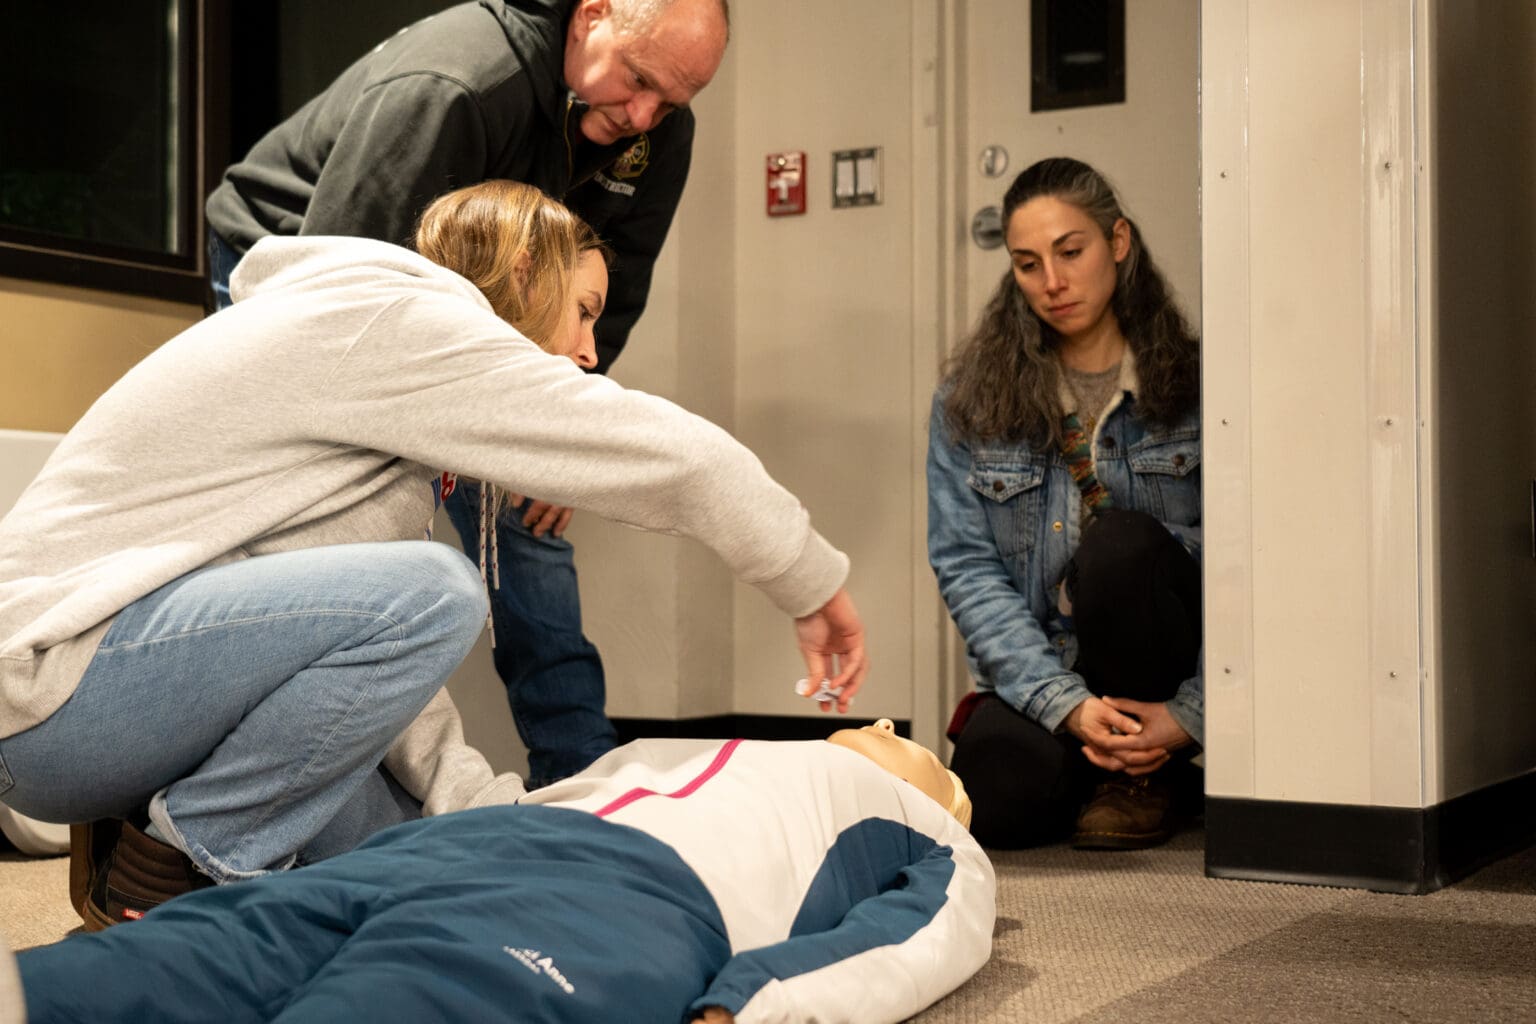 Bailey Rahn rehearses administering naloxone to a dummy in front of the instructor and another attendee.